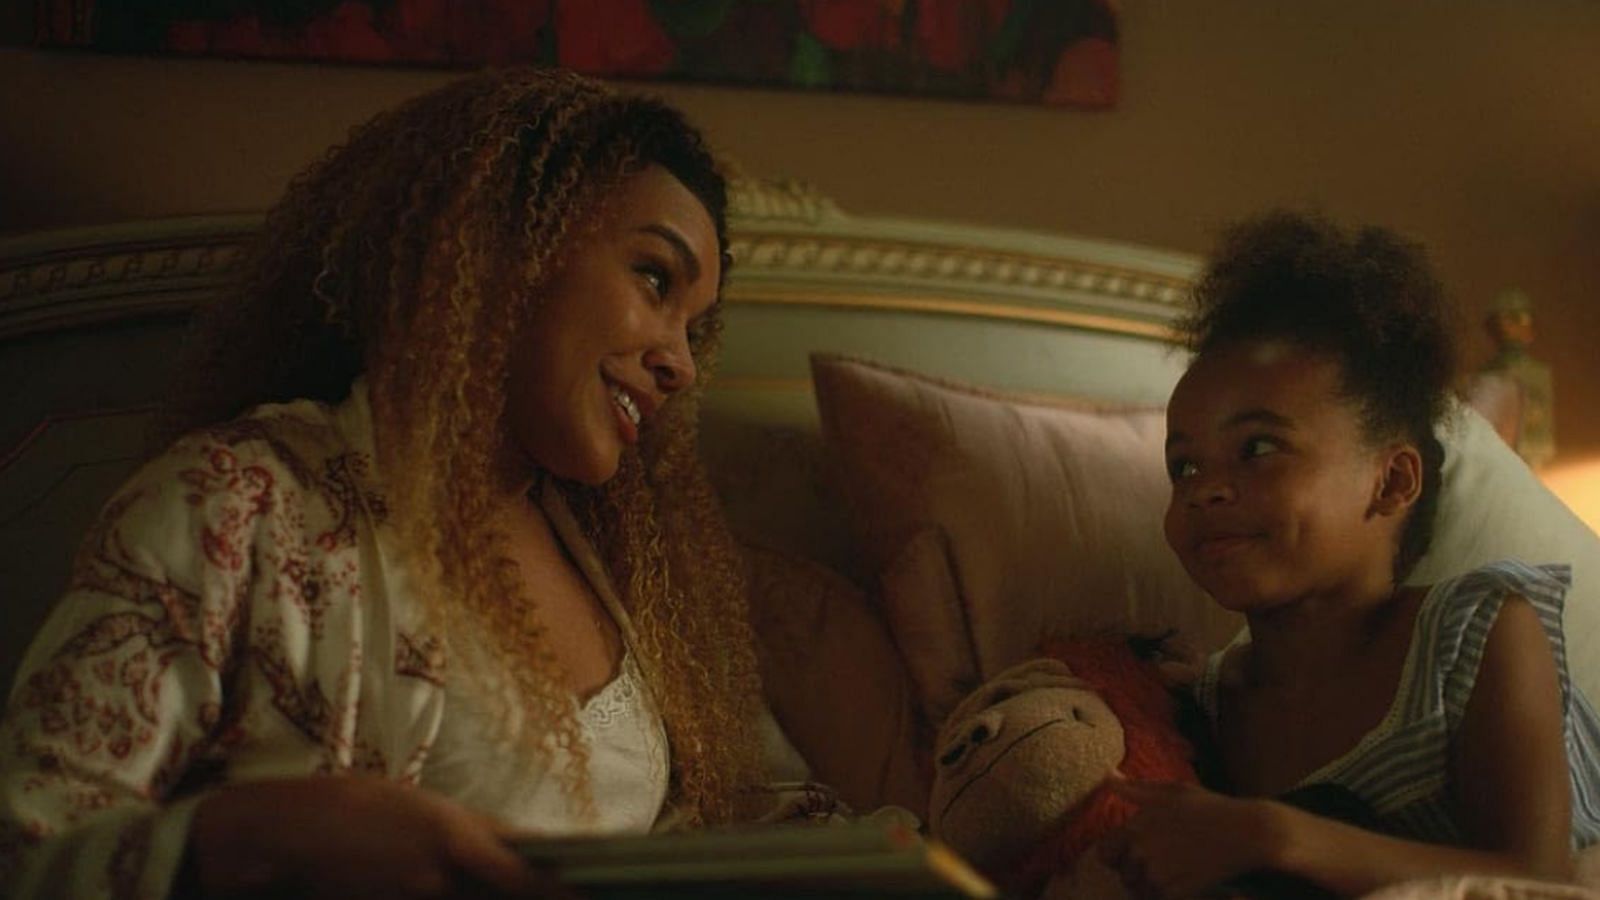 Emmy Raver-Lampman and Coco Assad as Allison and Claire in The Umbrella Academy (Image via IMDb)